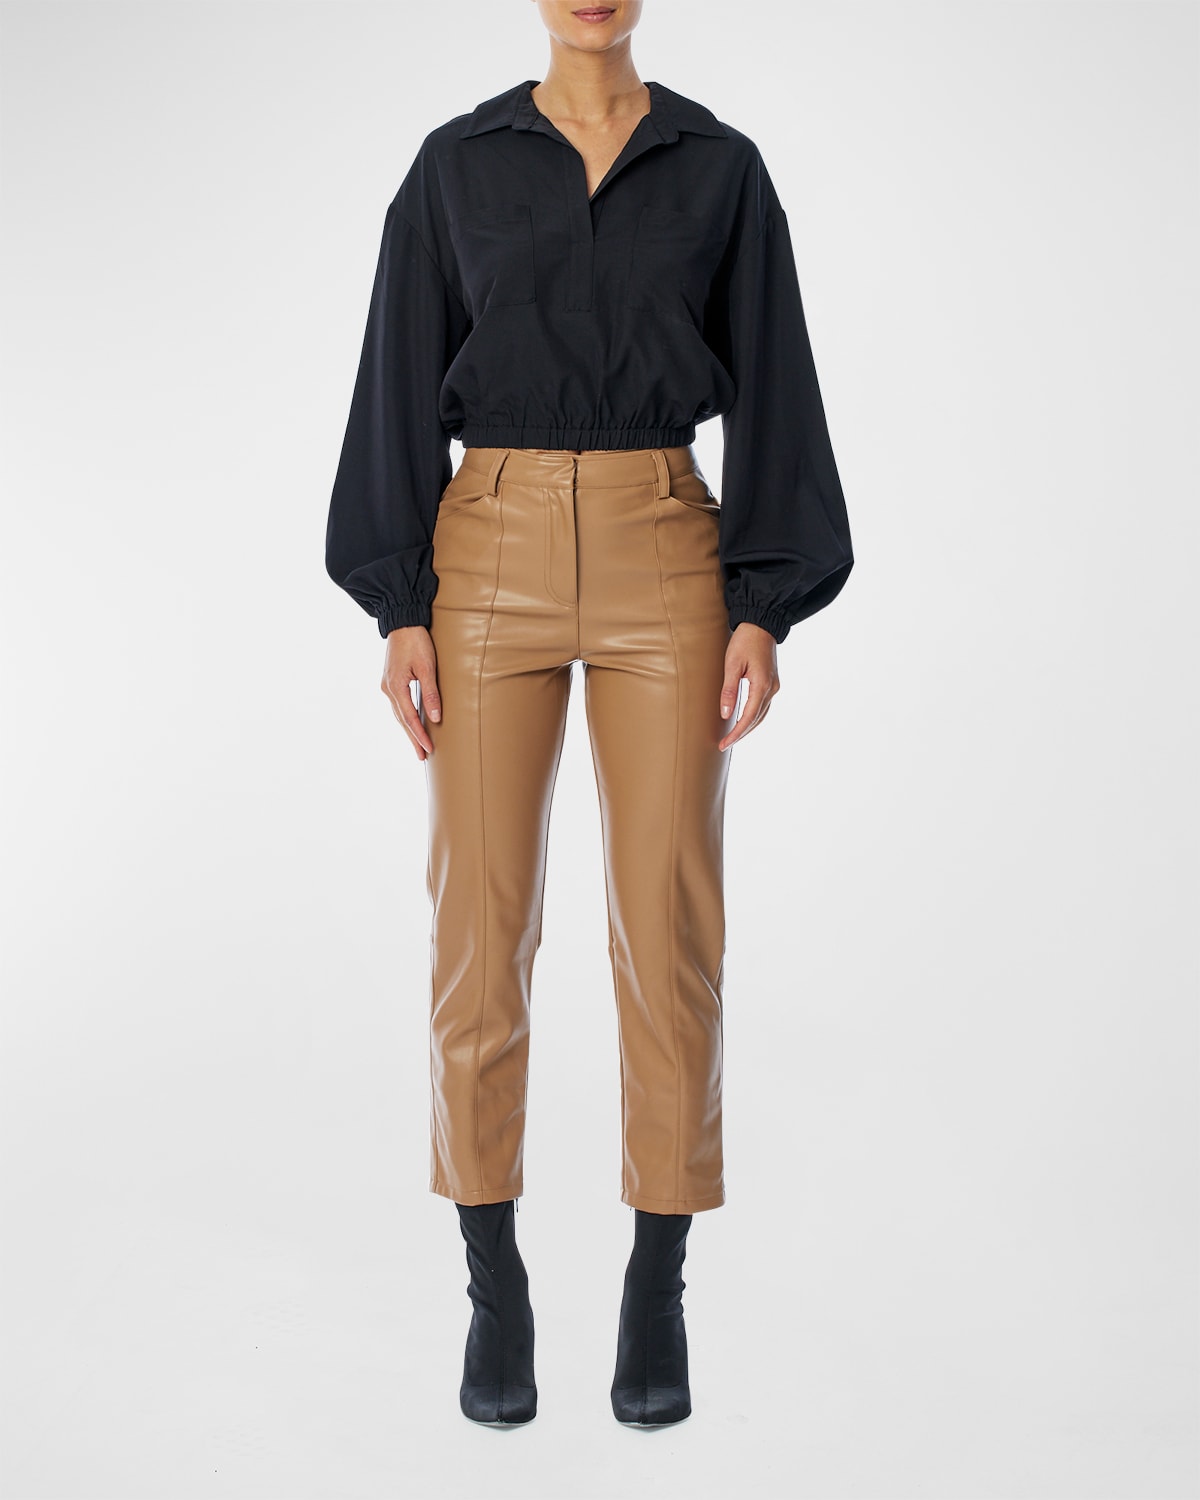 LBLC THE LABEL Nikki Cropped Long-Sleeve Blouse